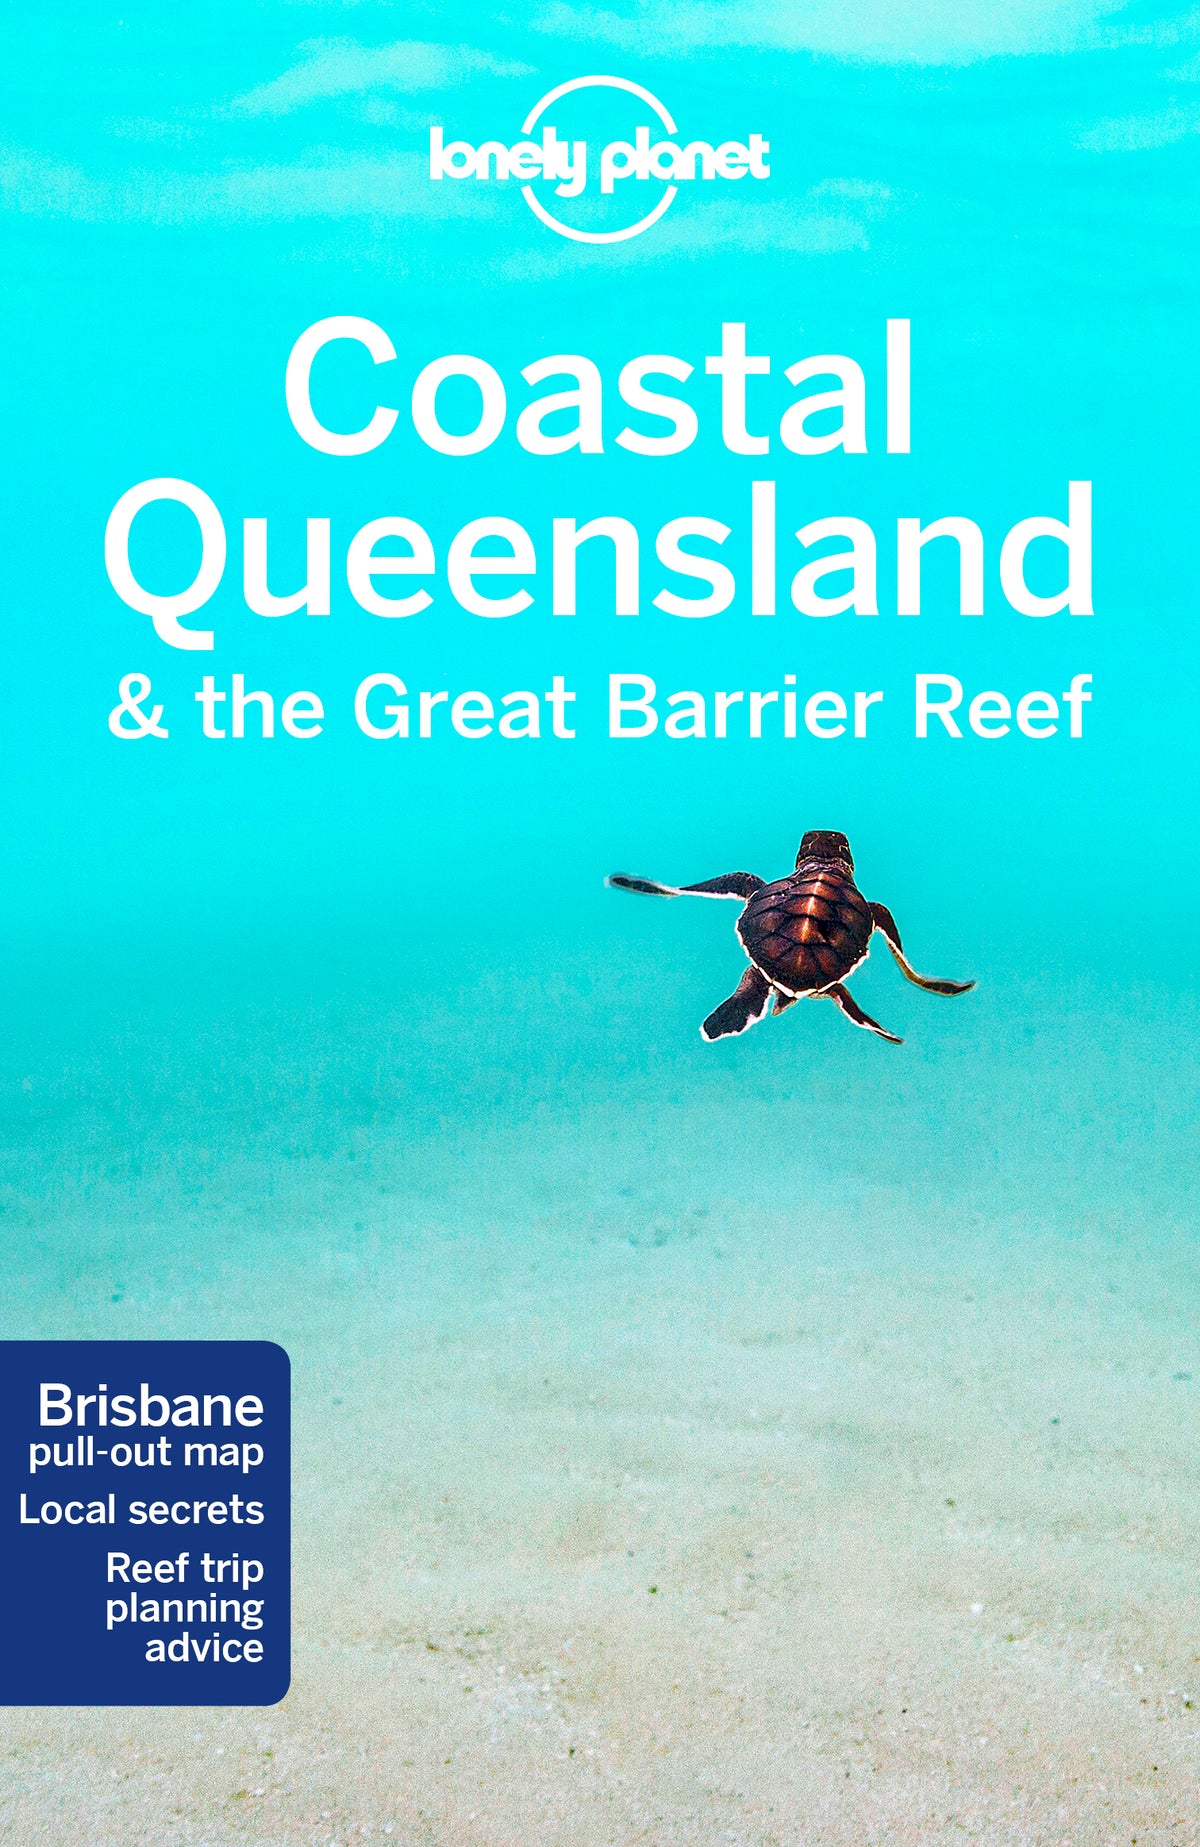 Coastal Queensland & the Great Barrier Reef travel guide